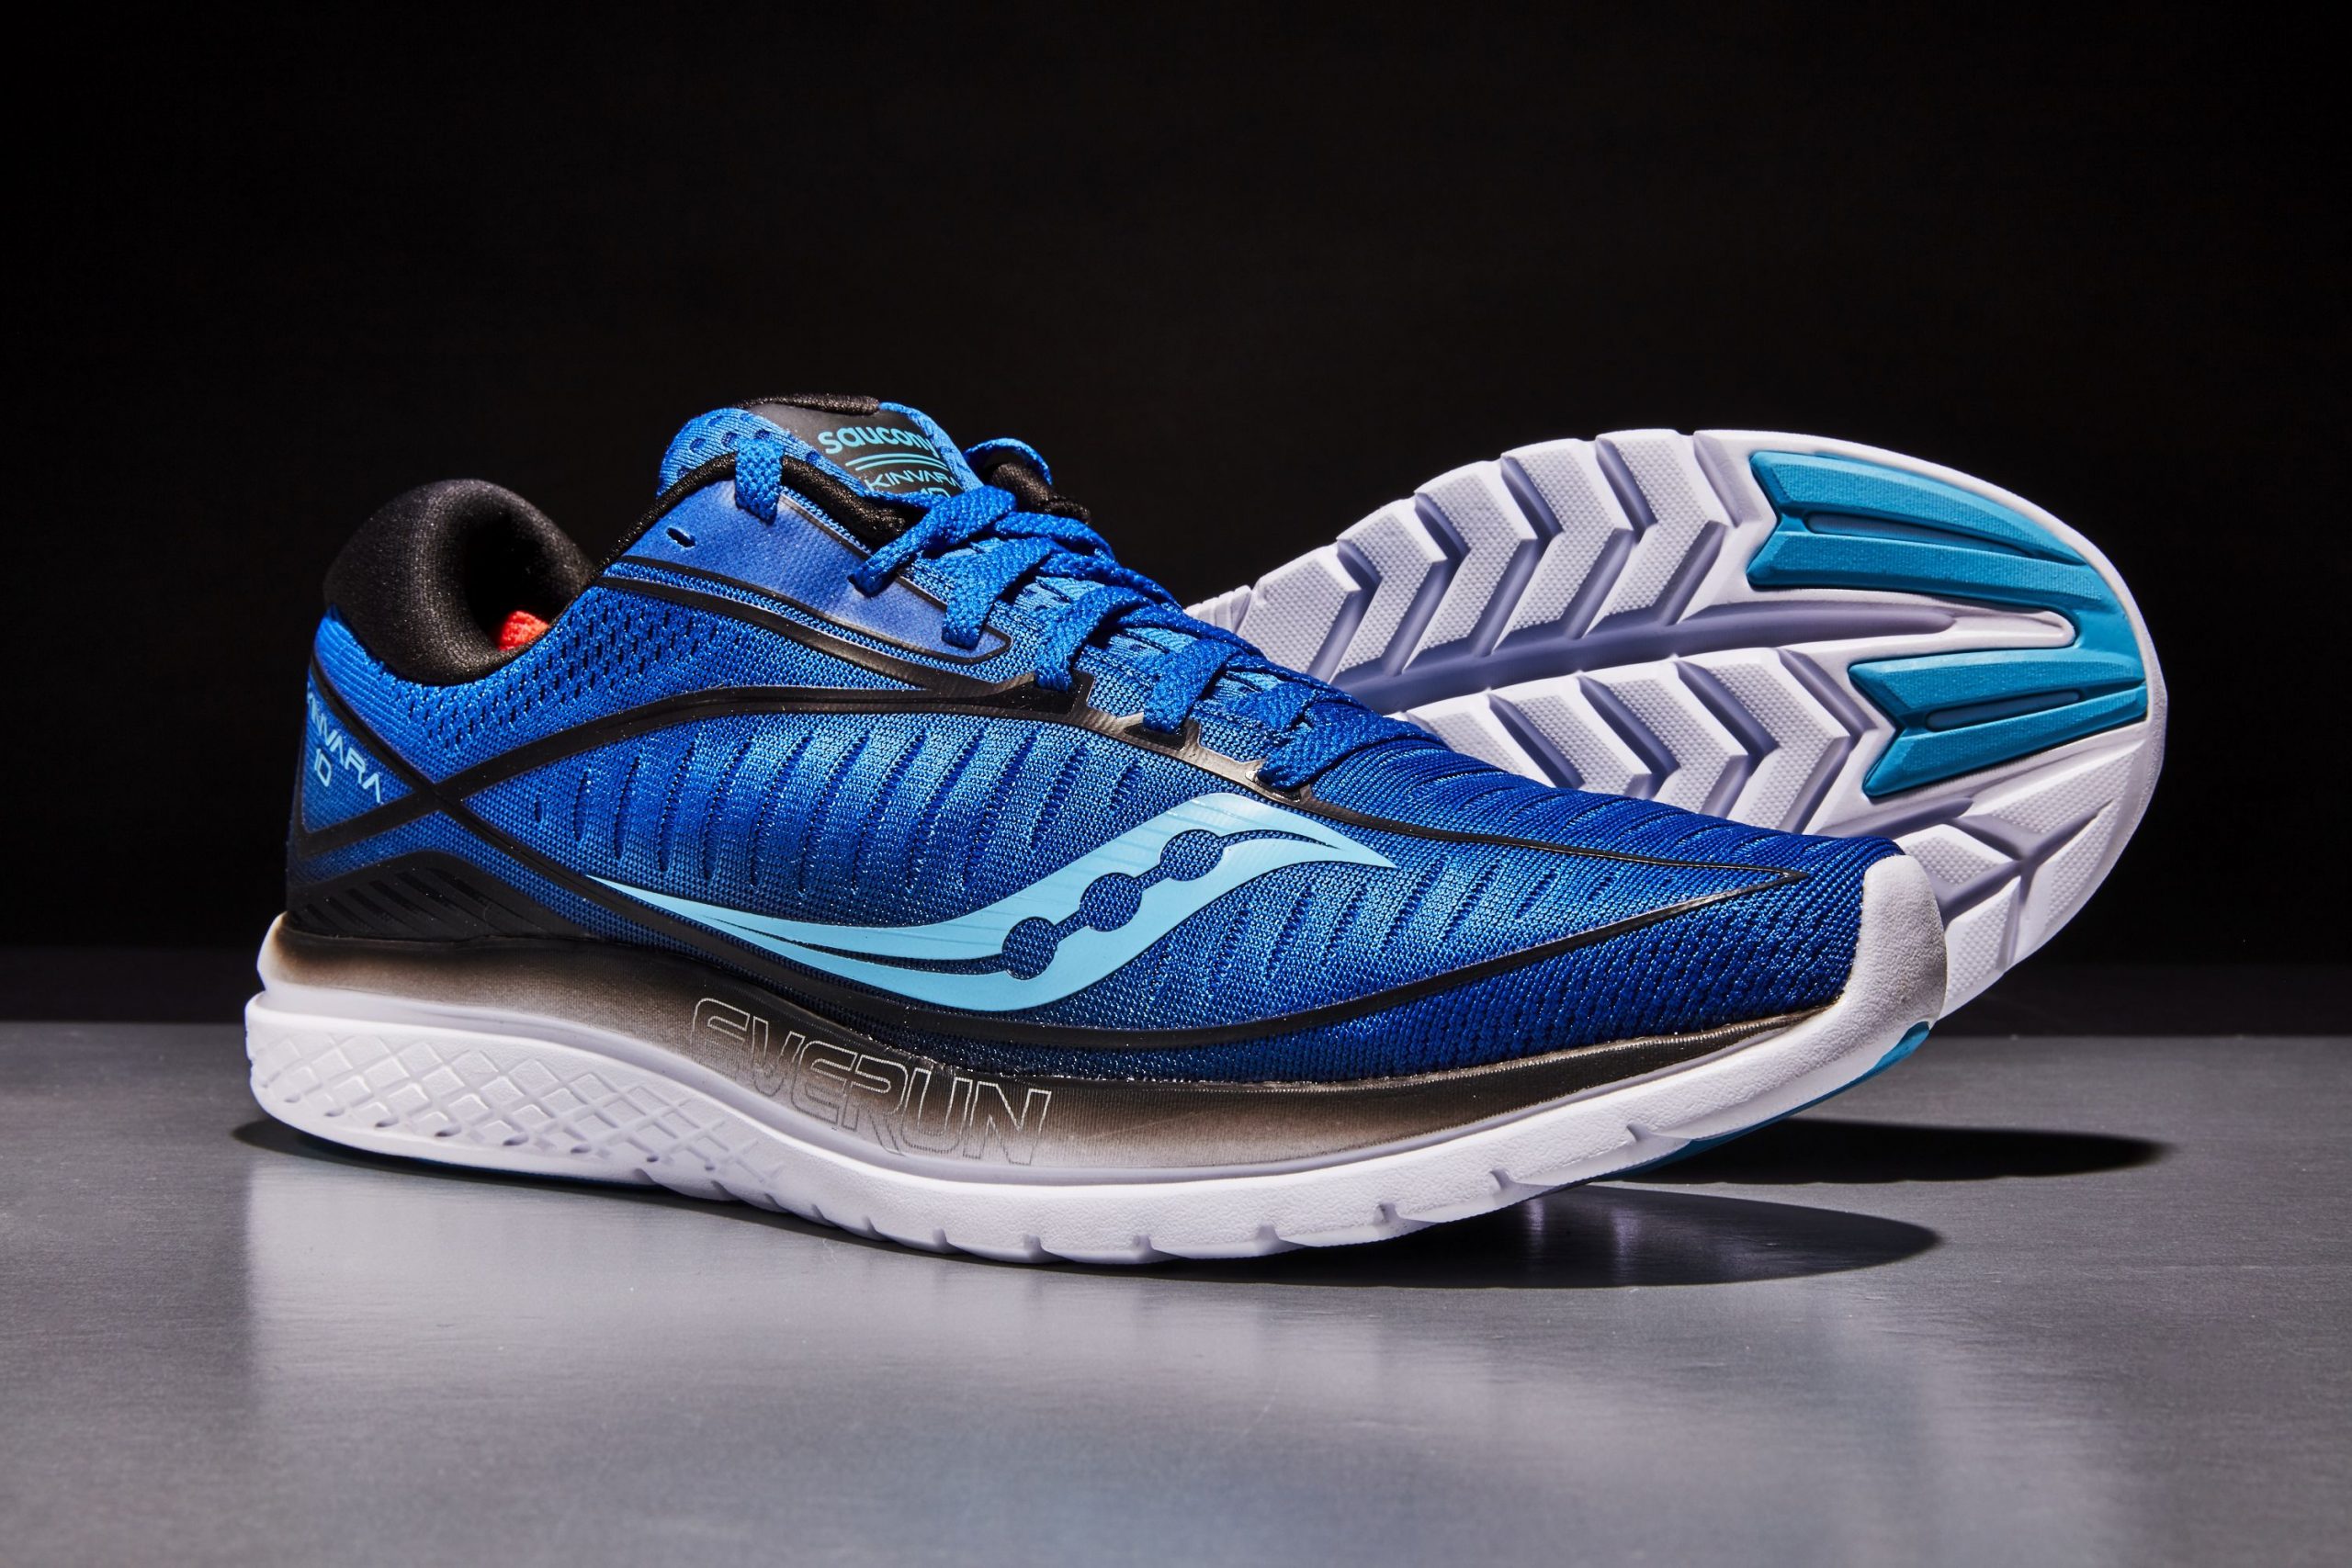 saucony distance running shoes